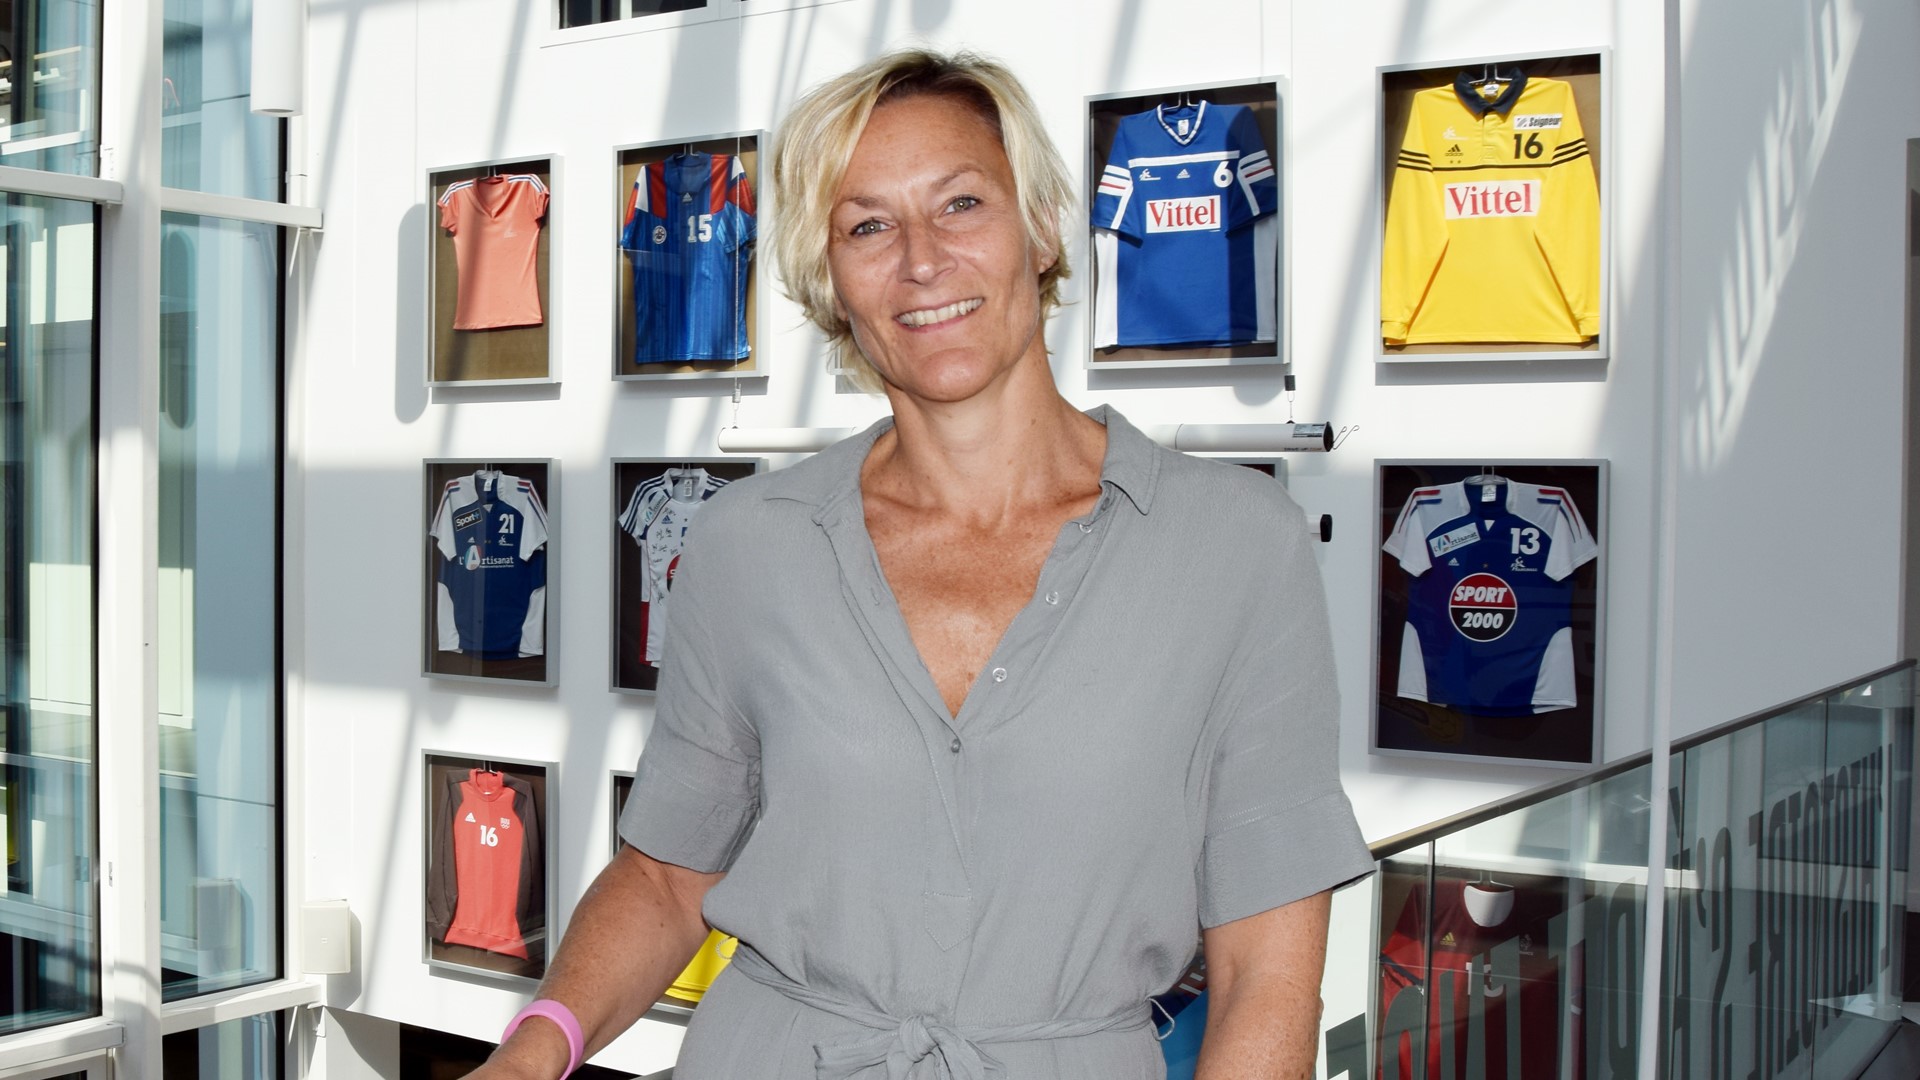 Katy Menini appointed communication director of the French Handball Federation